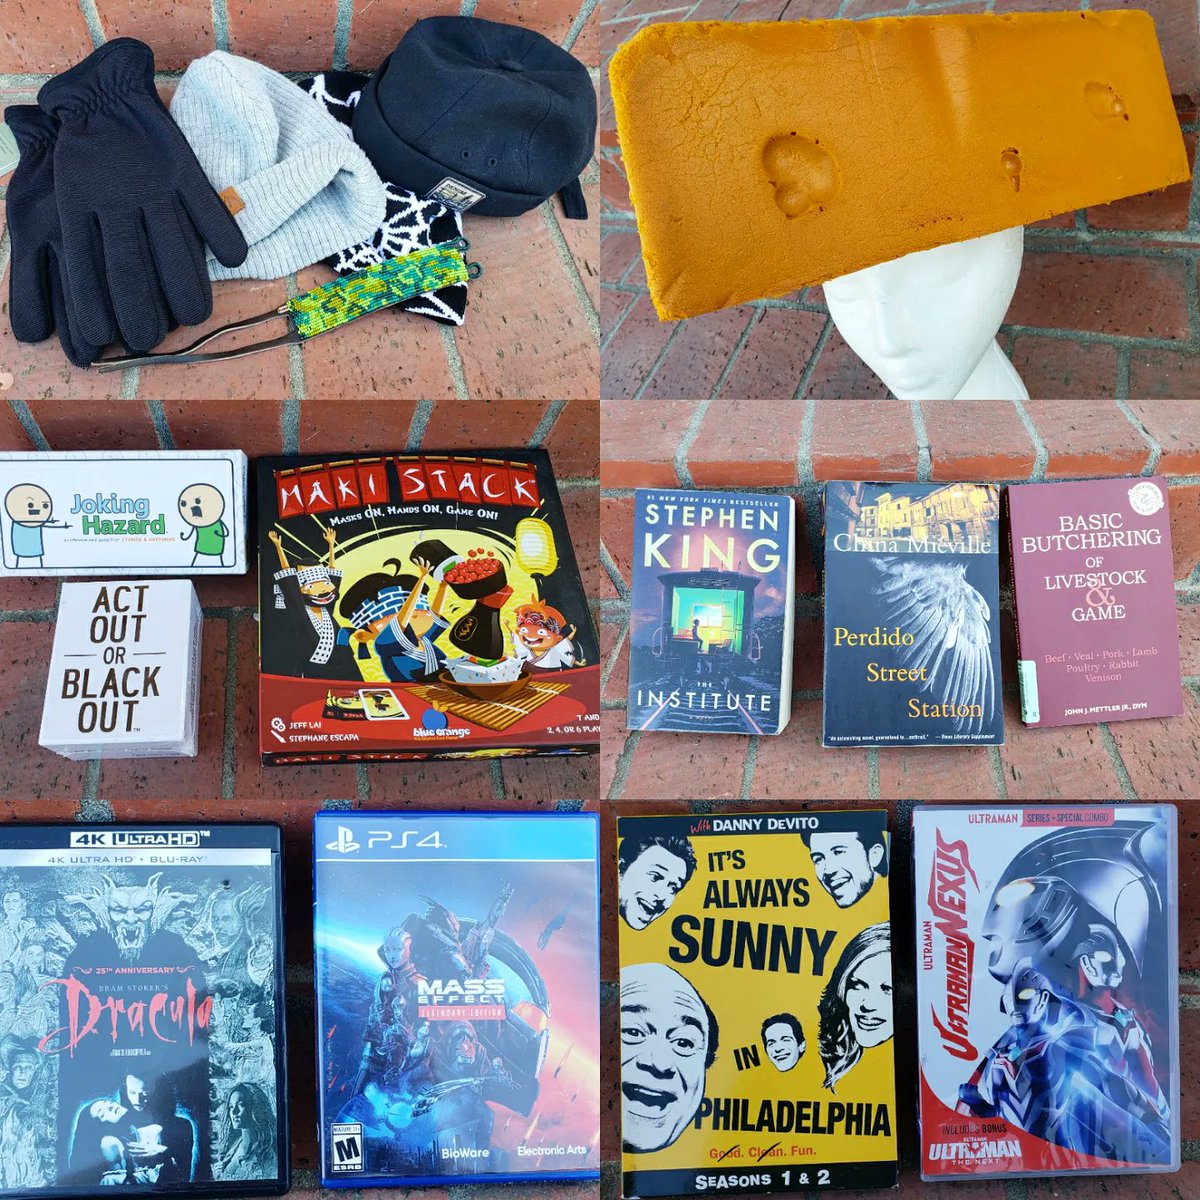 Some recent #thrift finds and freebies in the past couple of weeks! Spent about $45 here.

#thriftshop #thrifting #thrifted #thriftstorefinds #thrifter  #buynothing #secondhand #secondhandfinds #poppingtags #shirts #jackets #hats #beanies #boardgames #books #dvd #videogames